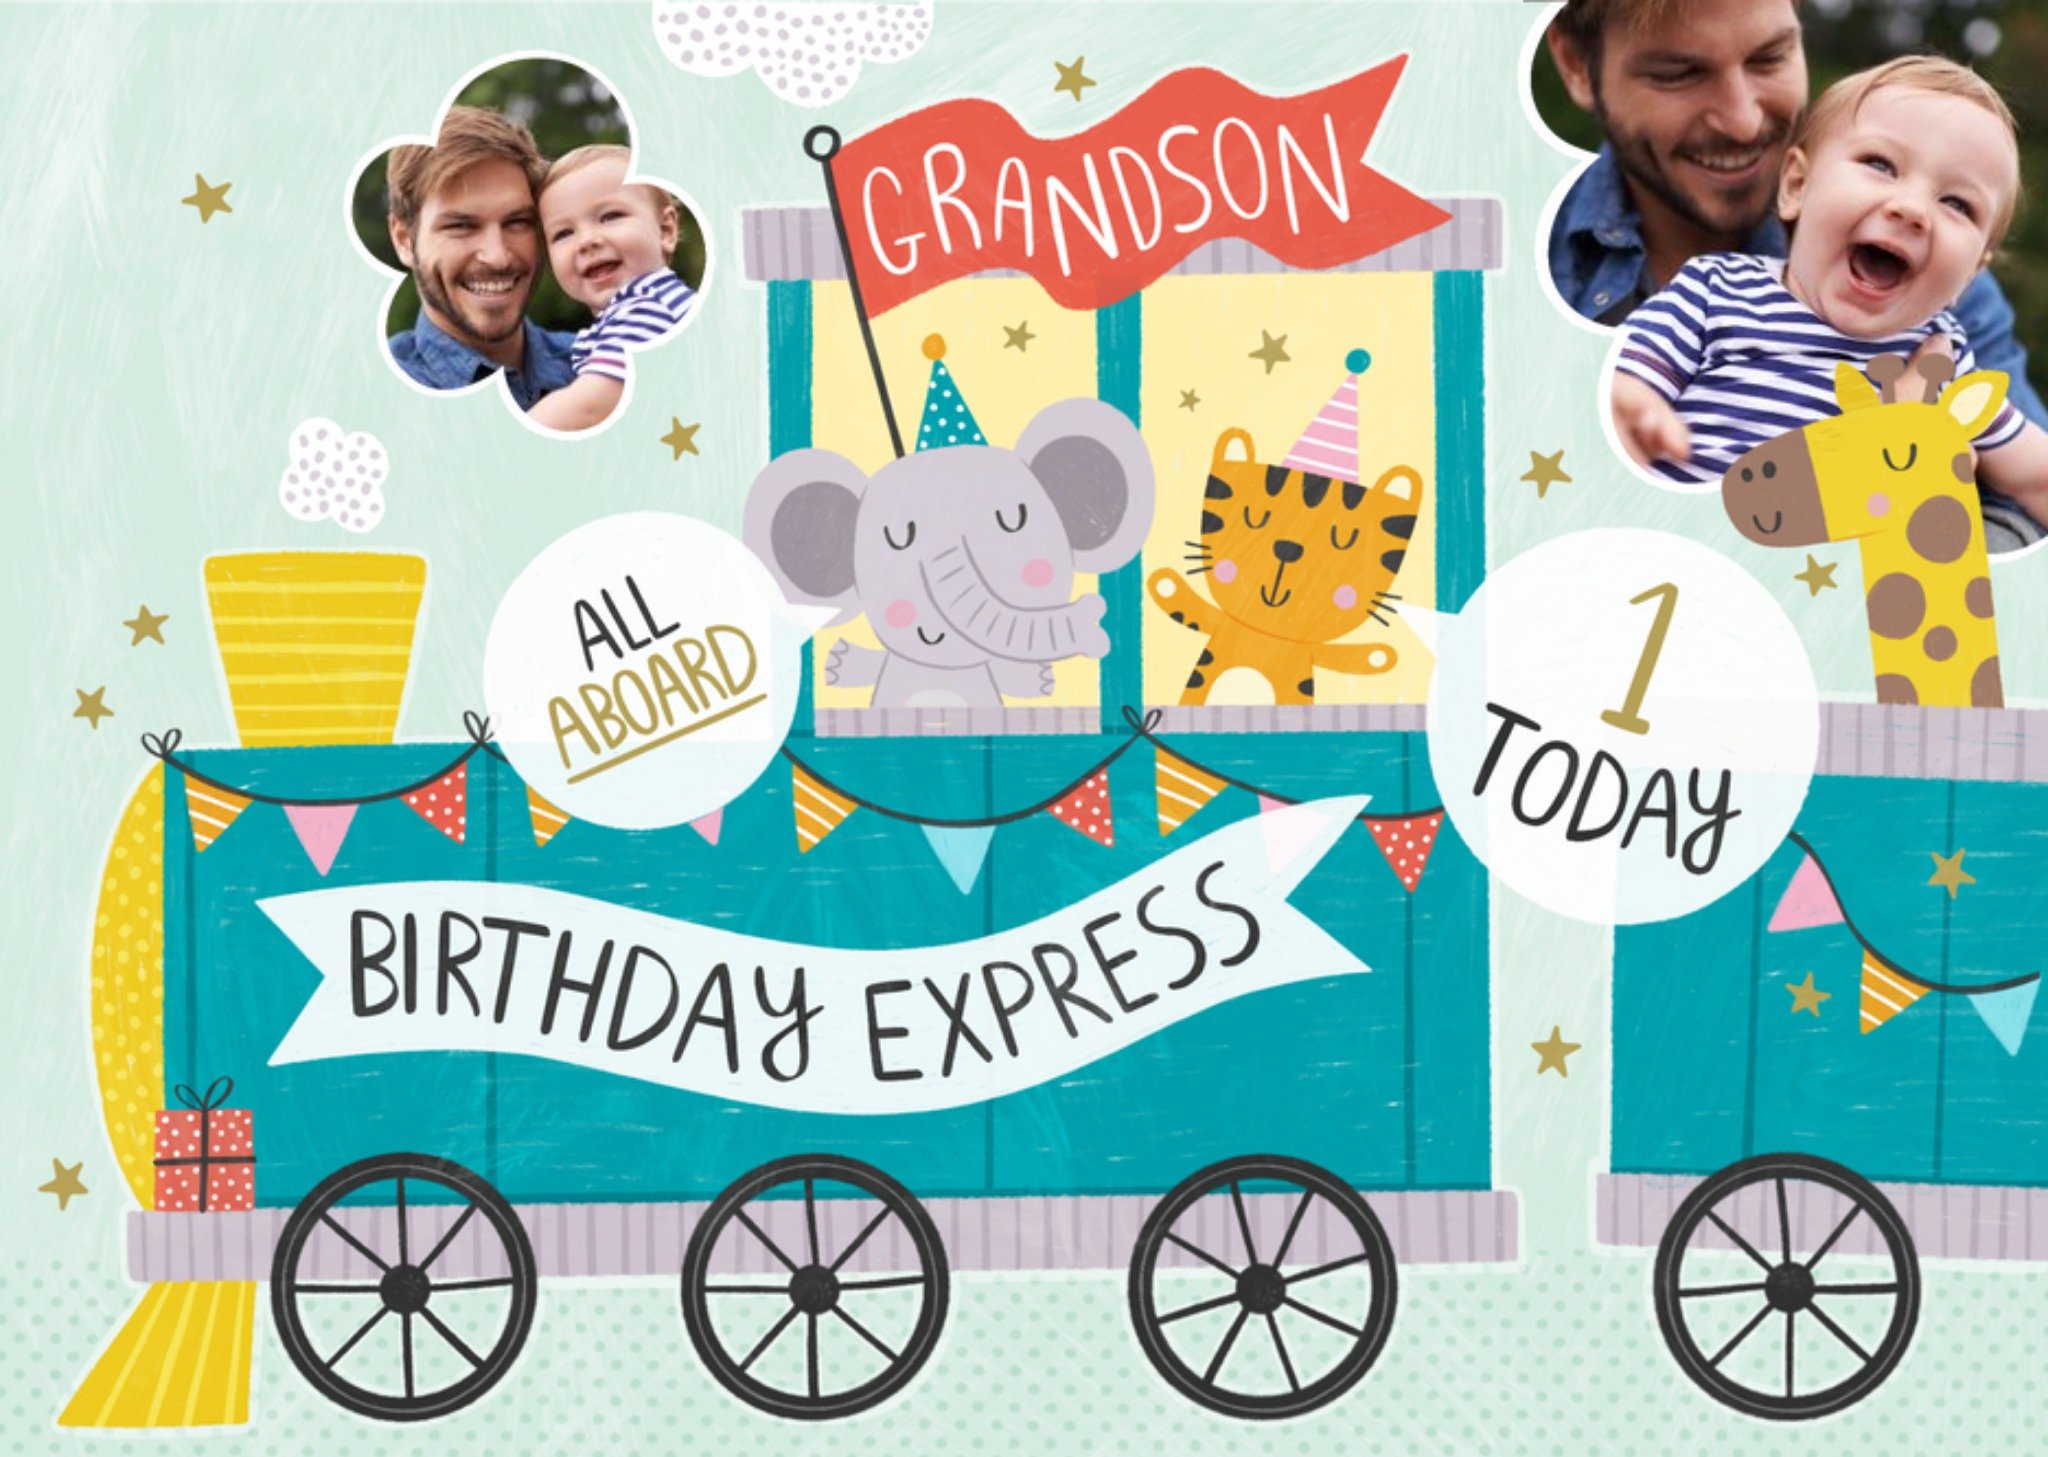 Moonpig Grandson All Aboard The Birthday Express 1 Today Photo Upload Card, Large